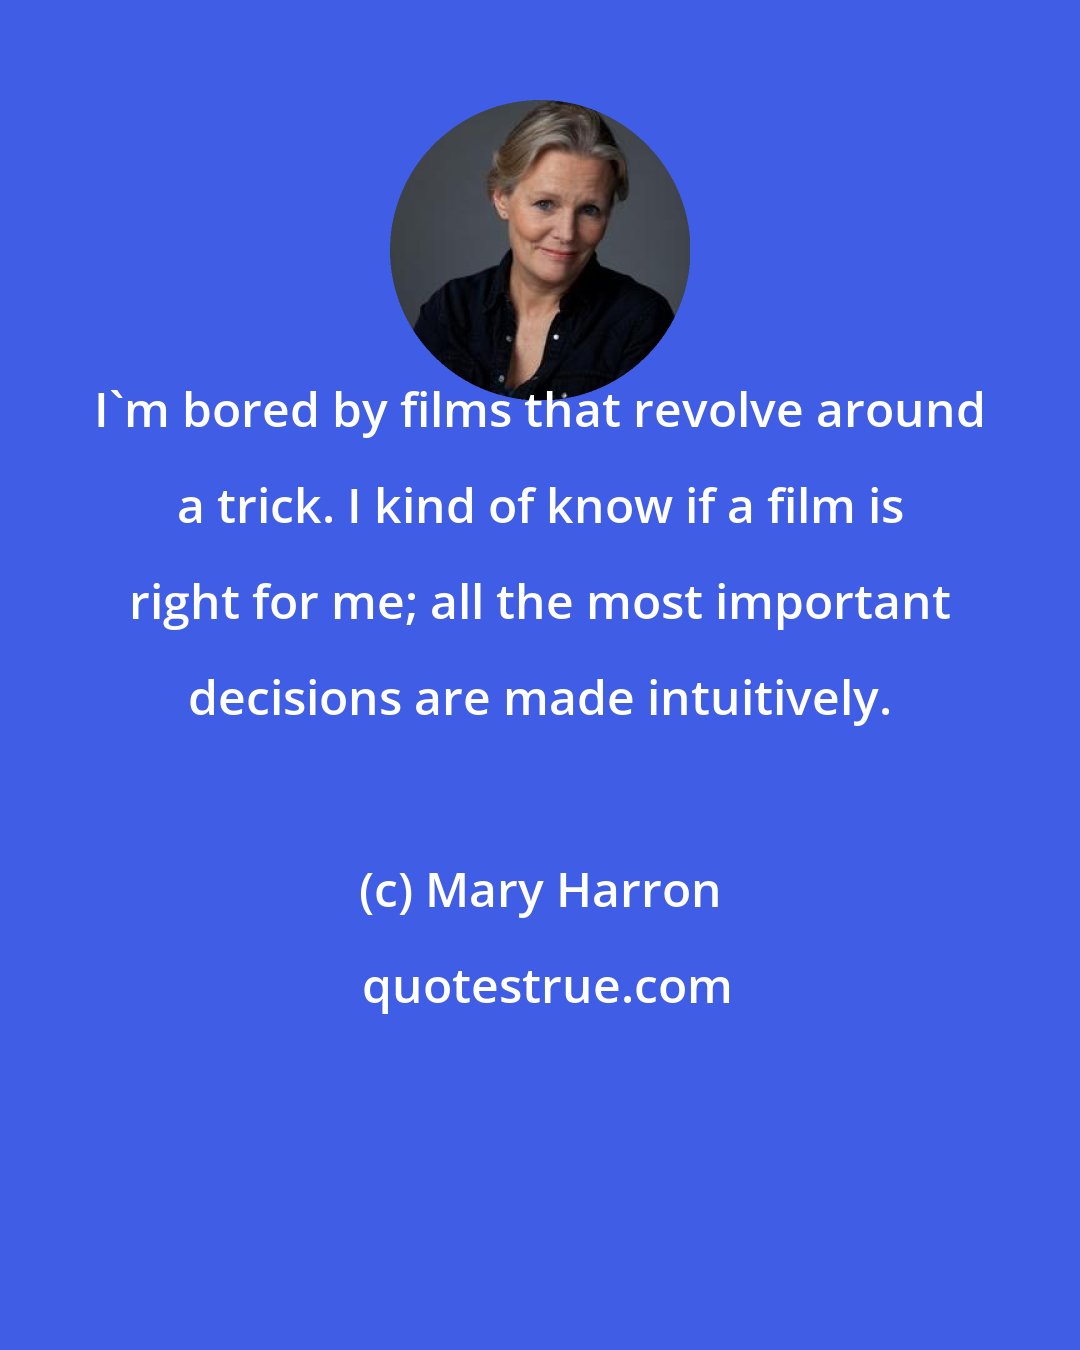 Mary Harron: I'm bored by films that revolve around a trick. I kind of know if a film is right for me; all the most important decisions are made intuitively.